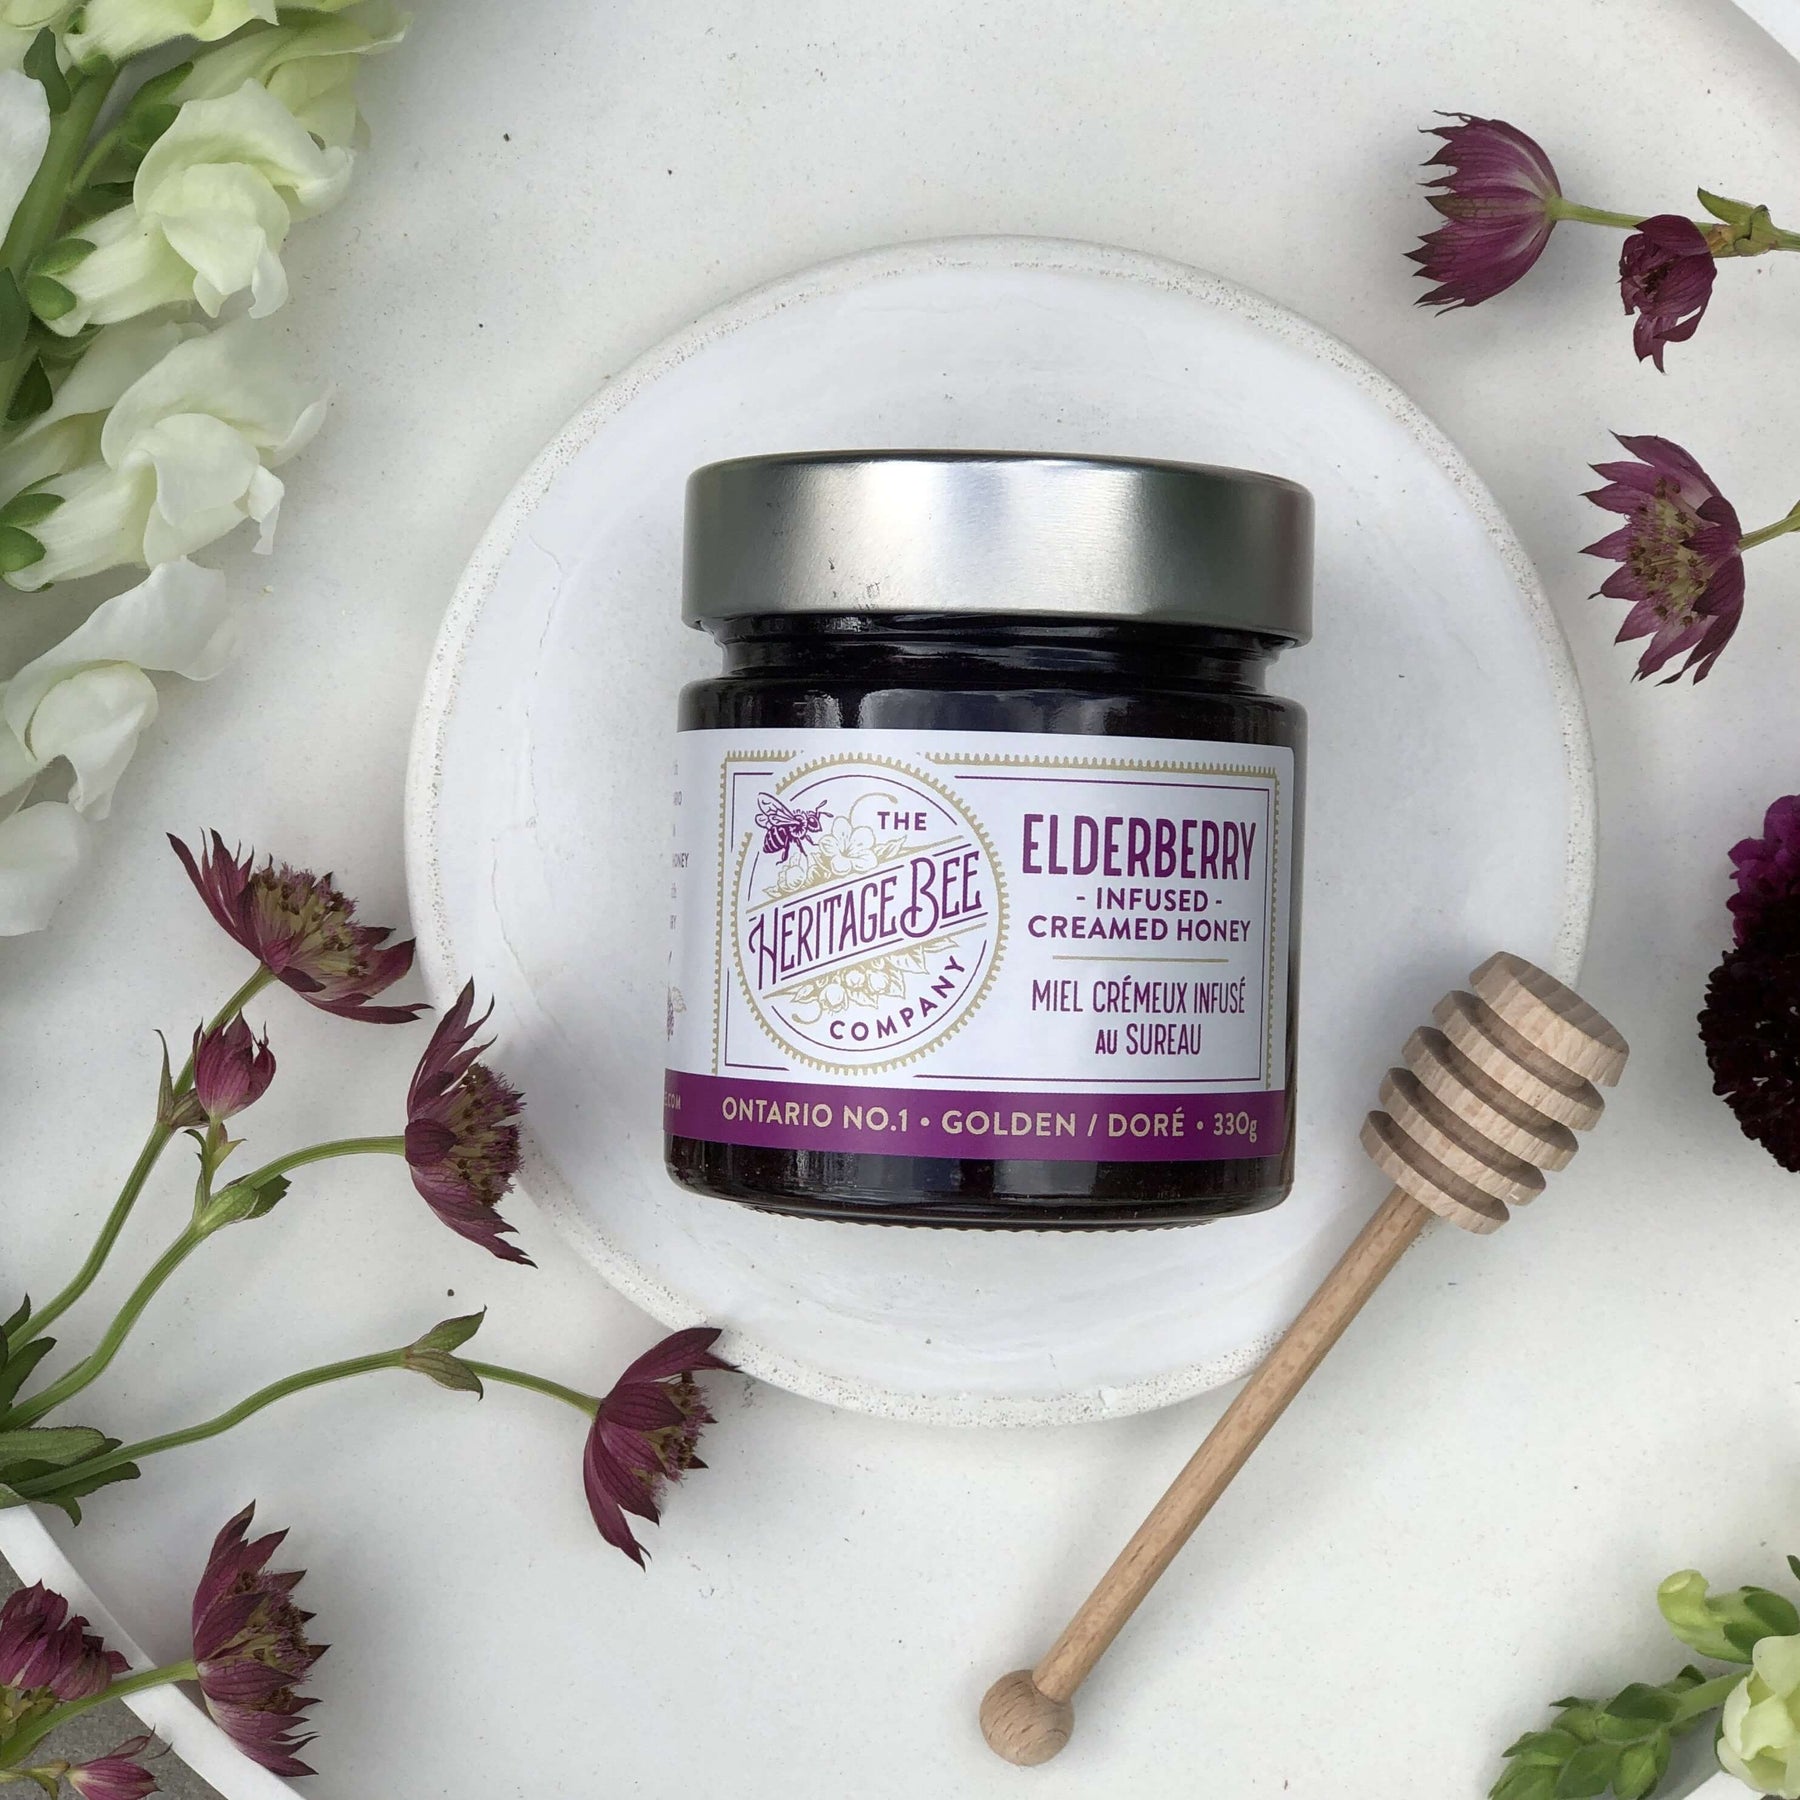 Handcrafted 100% Ontario elderberry infused creamed honey. The elderberry plant can boost immune system, mitigate inflammation, lessen stress, and protect the heart. Can be used as a jam alternative.